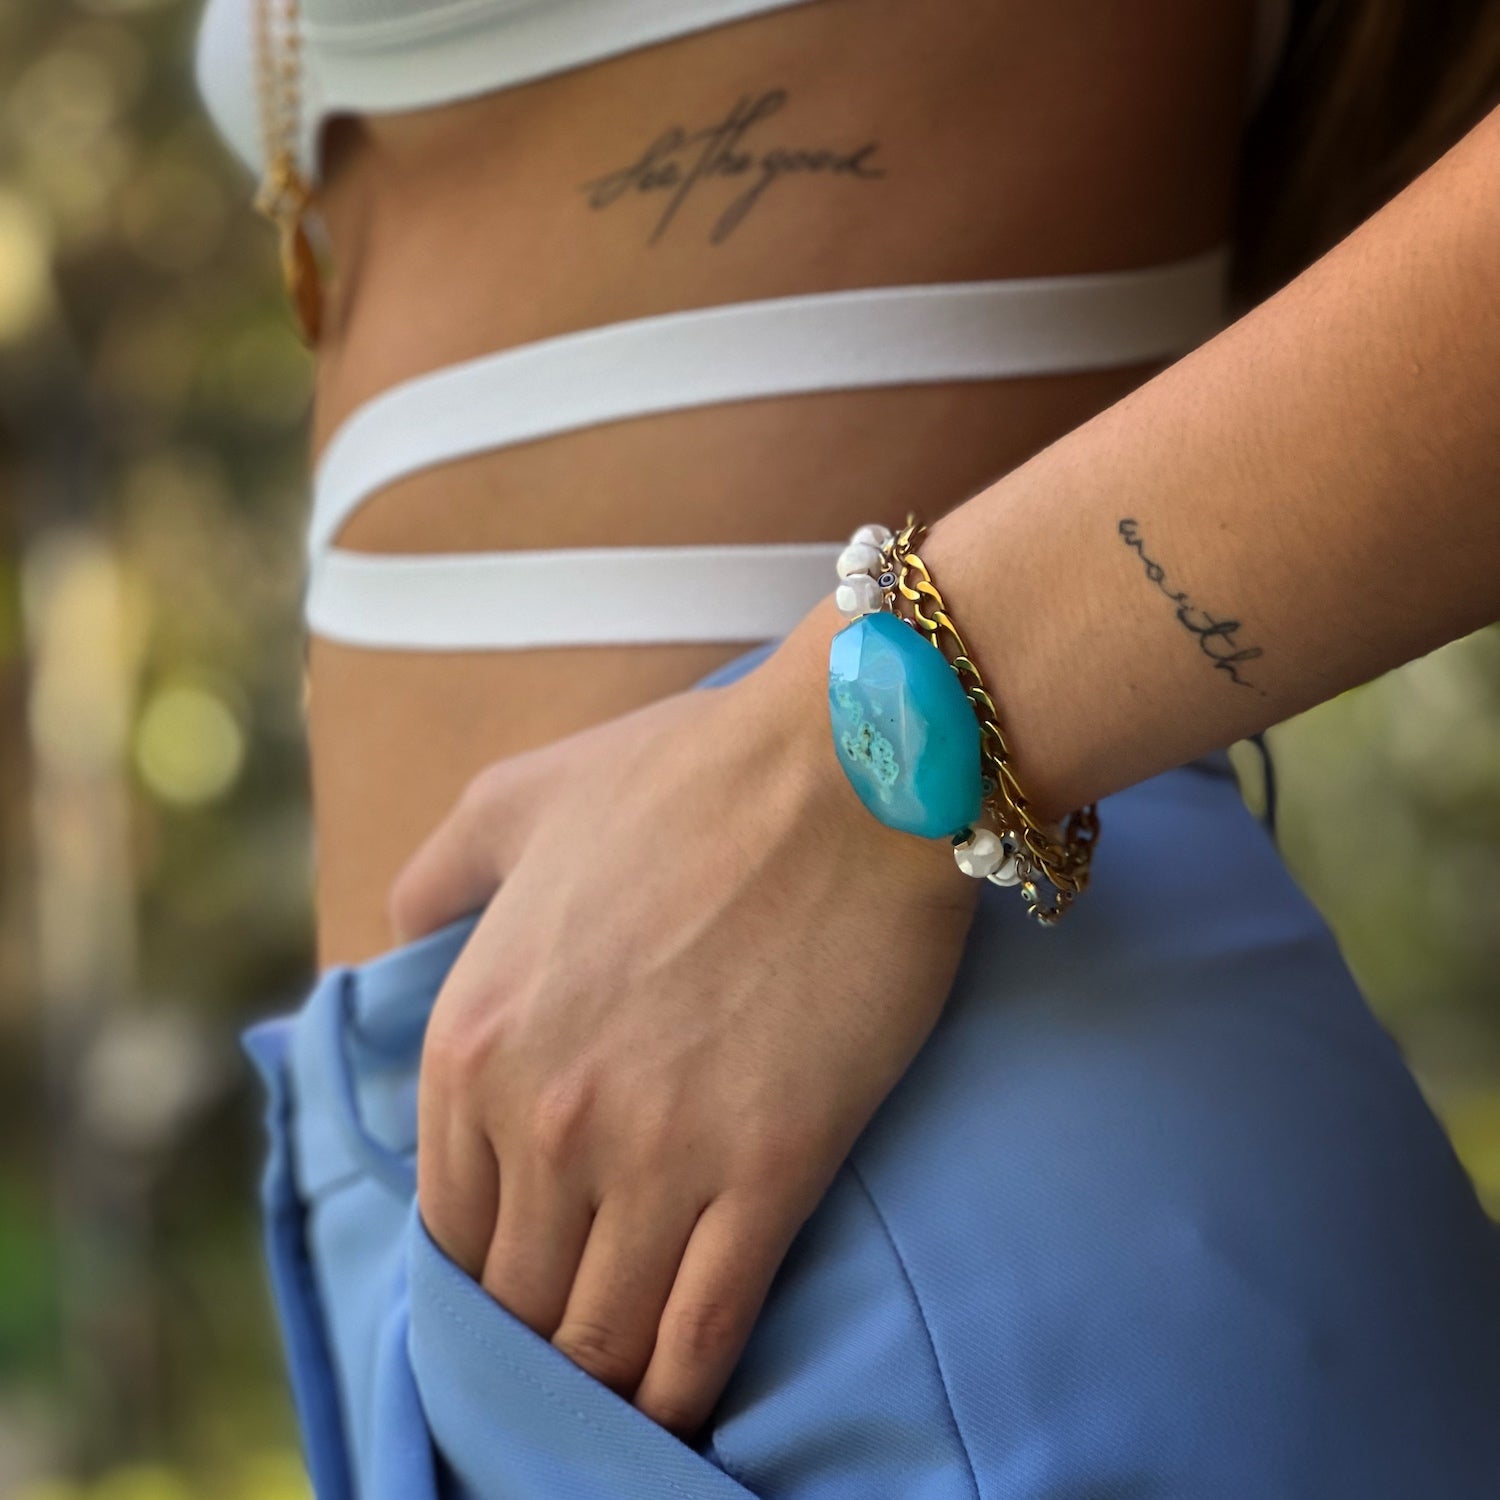 With the Nepal Blue Agate Bracelet adorning the hand model's wrist, its unique design and craftsmanship are on full display.